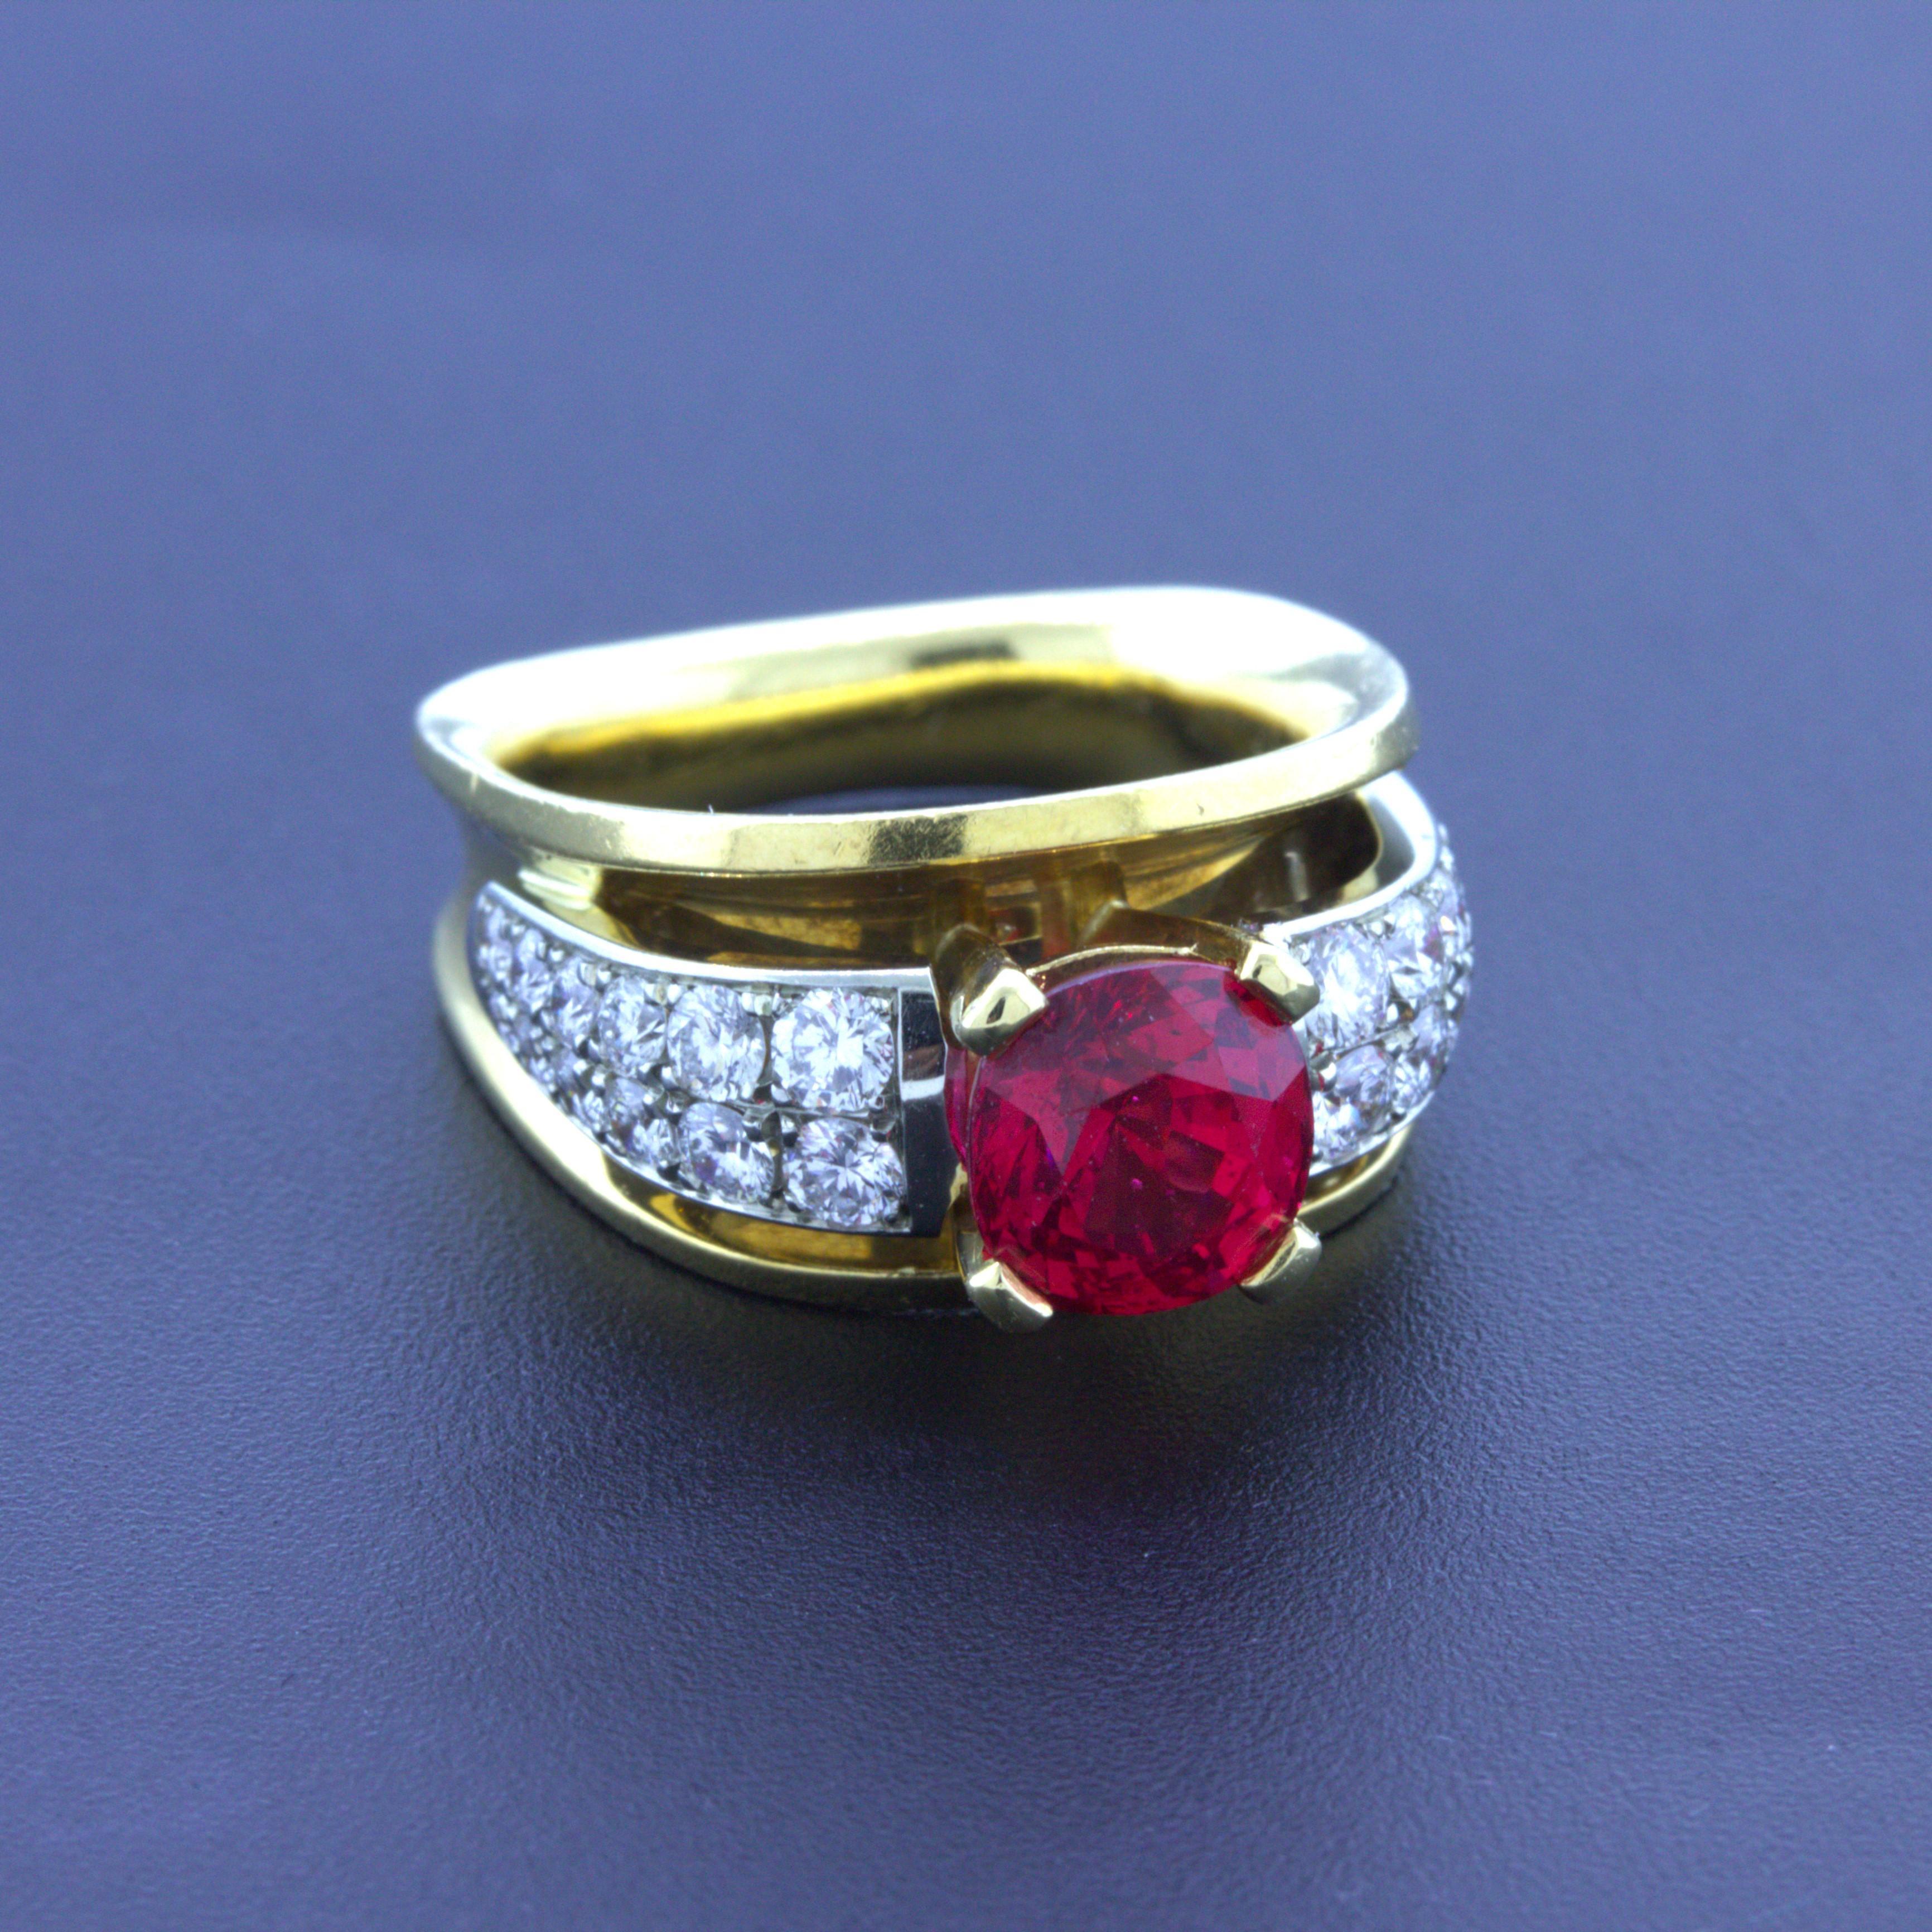 A lovely 18k yellow gold ring featuring an extra fine gem red spinel. It weighs 2.28 carats and has an intense and vibrant pure red color along with great brightness and life. It scintillates in the light, as fine spinel is known to do, and is very